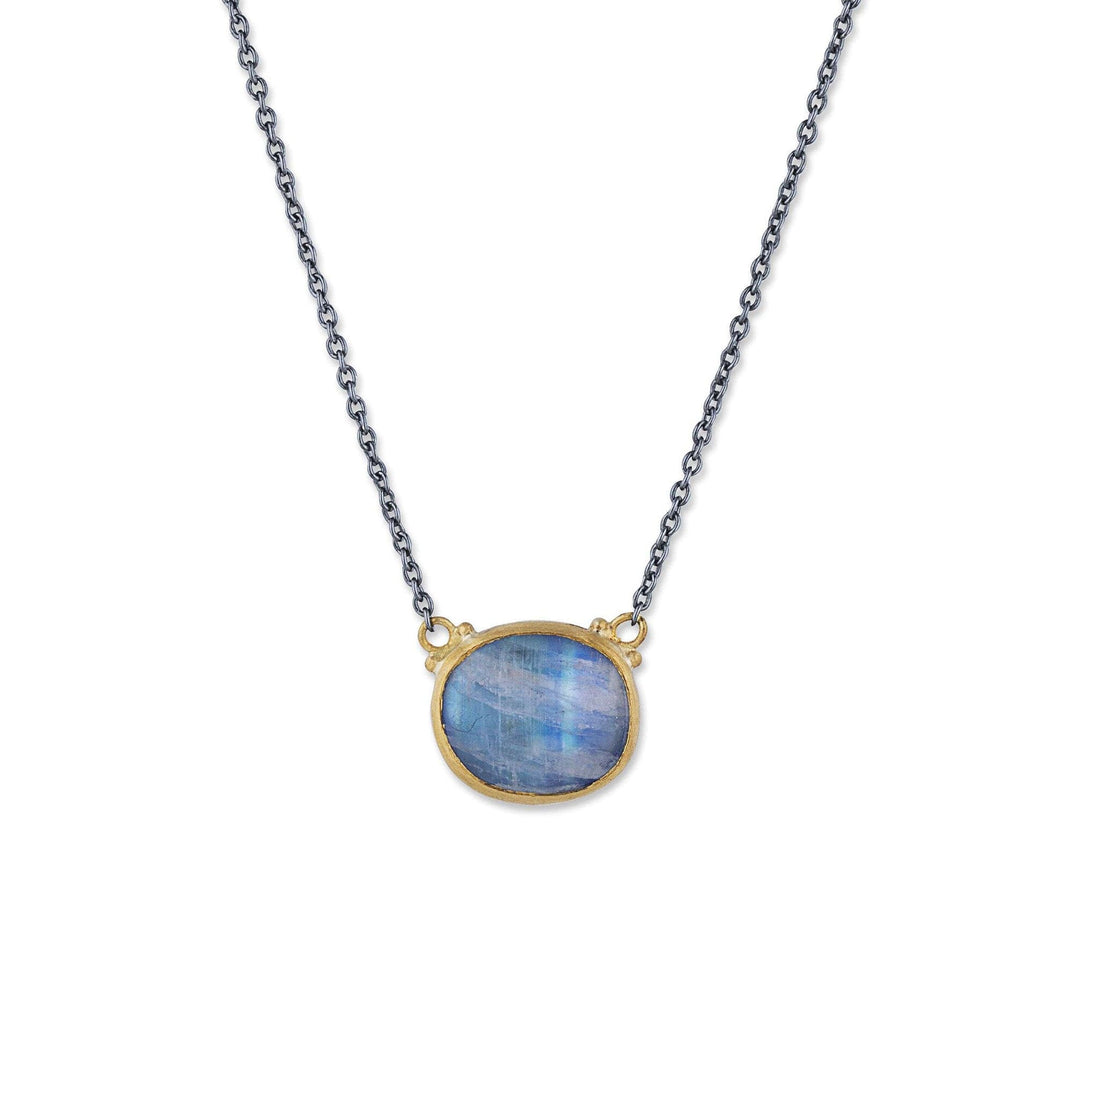 Moonstone Pendant Necklace in Silver & Gold by Lika Behar